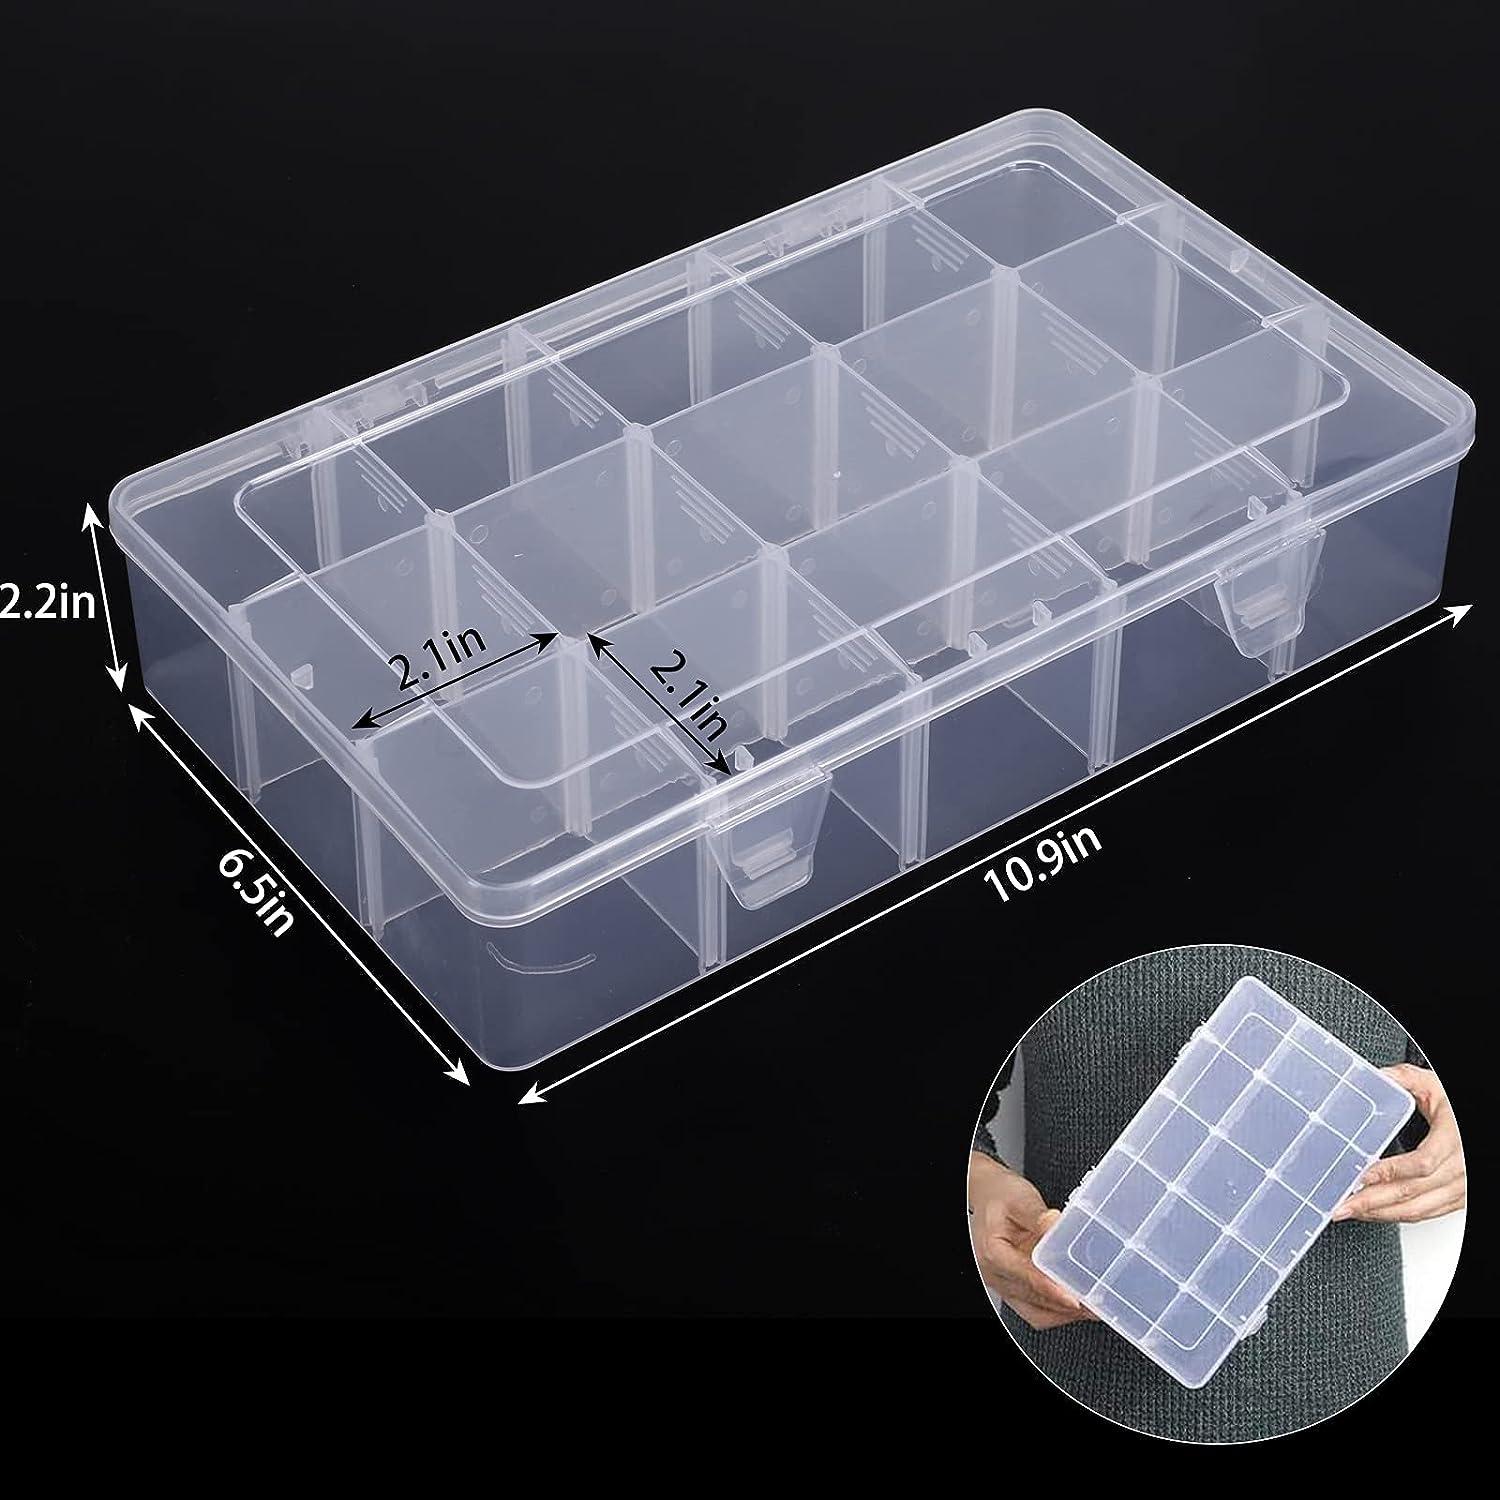 SGHUO 3 Pack15 Grids Large Plastic Storage Box Organizer Box,15 Compartments  with Dividers for Tackle Box,Beads,Washi Tape,Ribbon, Crafts, Art Supply  10.9X6.5X2.2inch